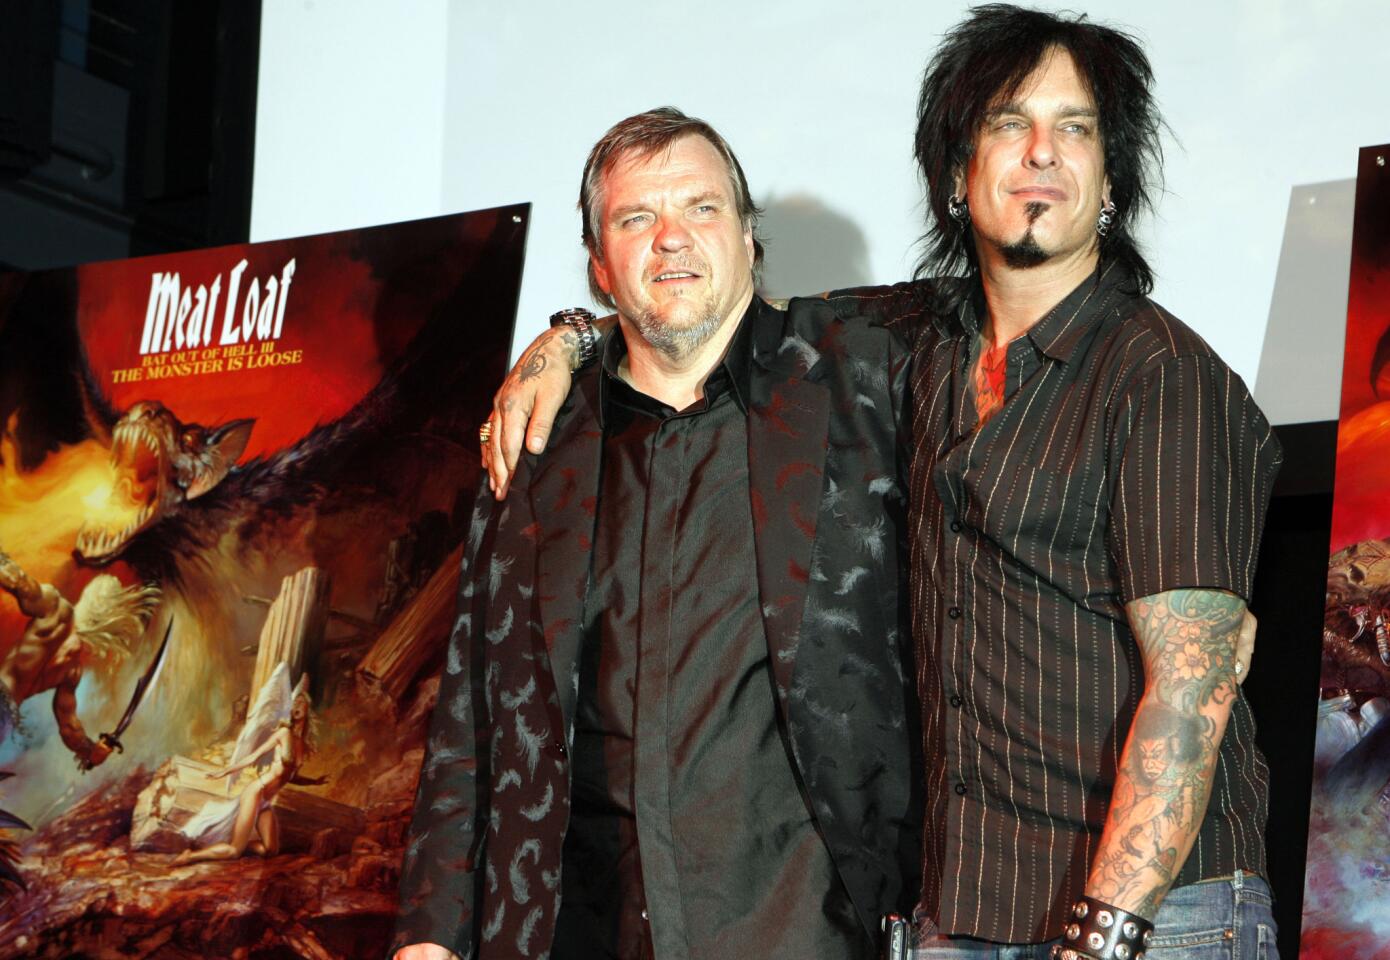 Meat Loaf and Nikki Sixx